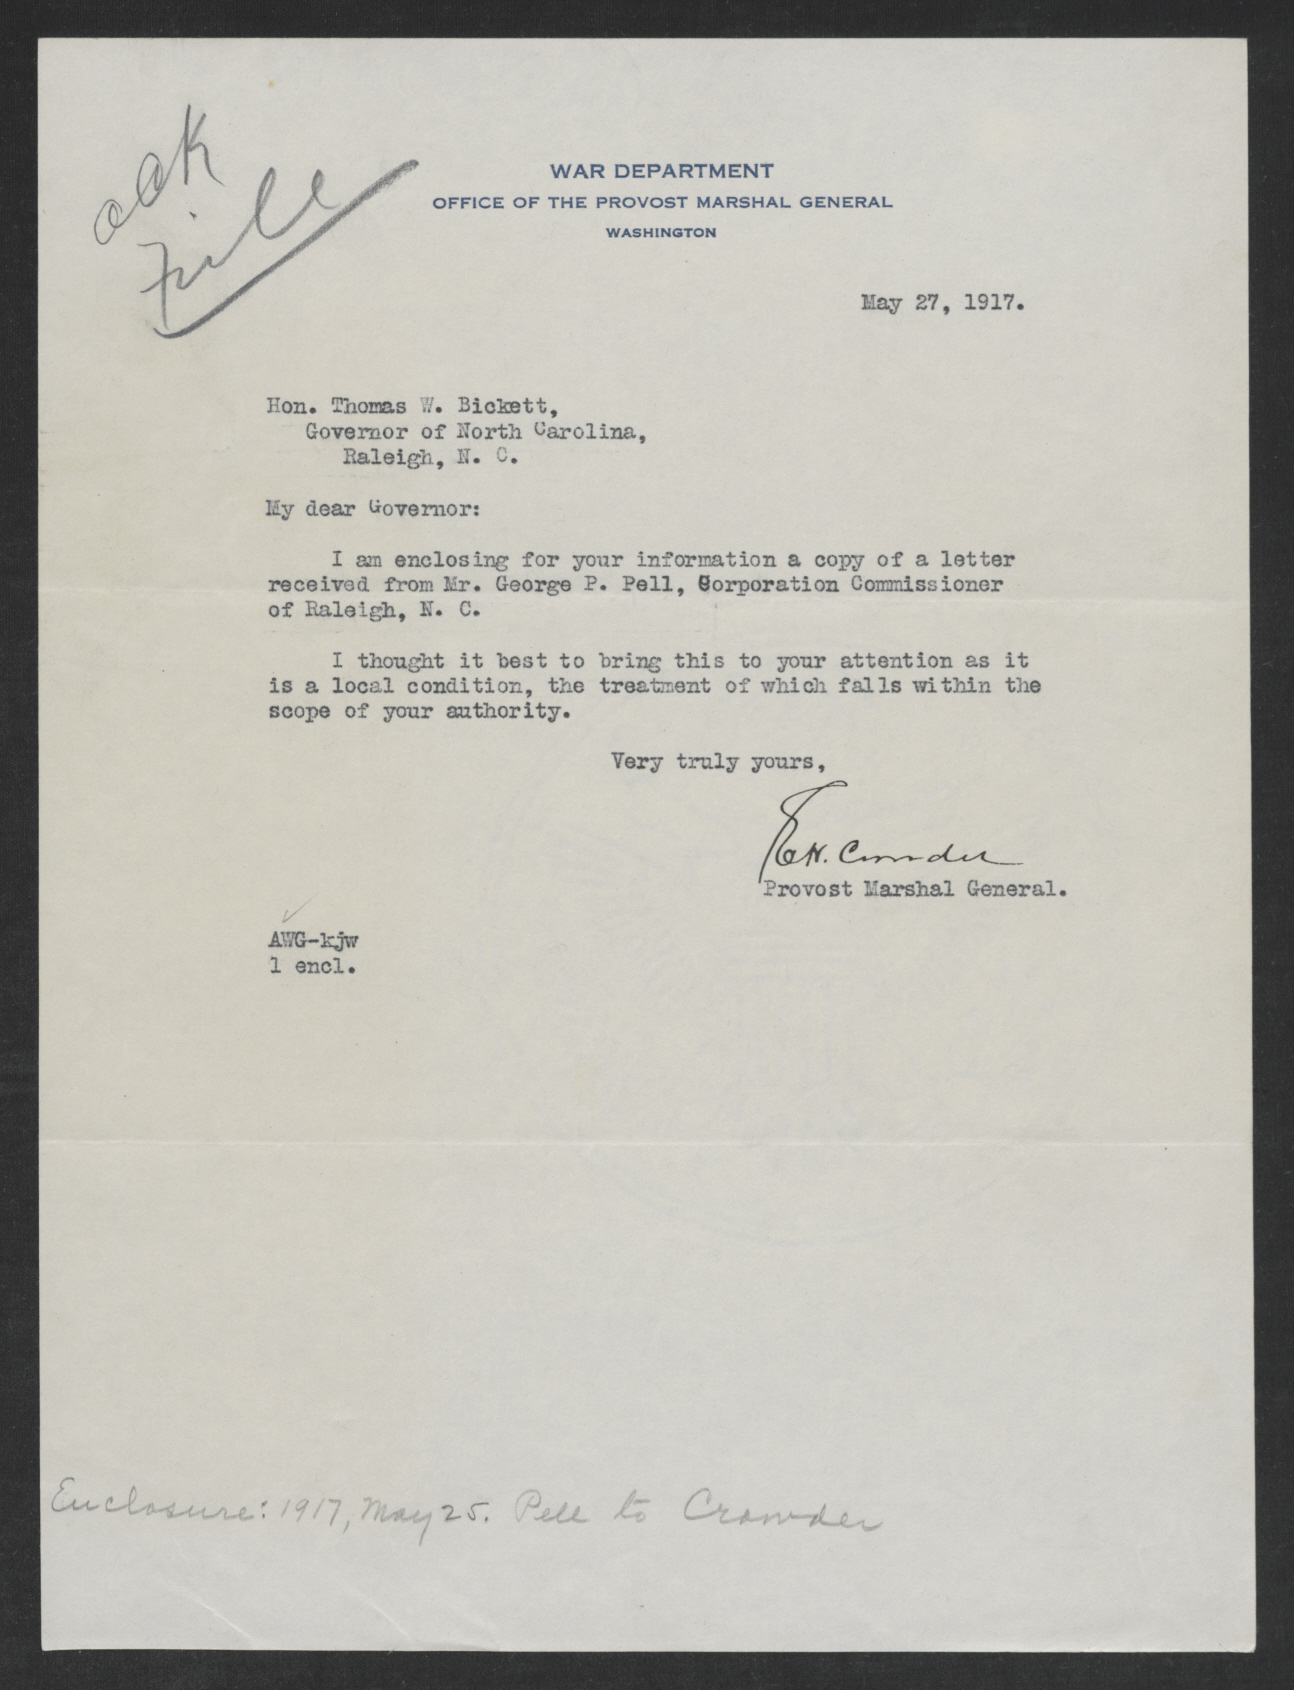 Letter from Enoch H. Crowder to Gov. Bickett, May 27, 1917